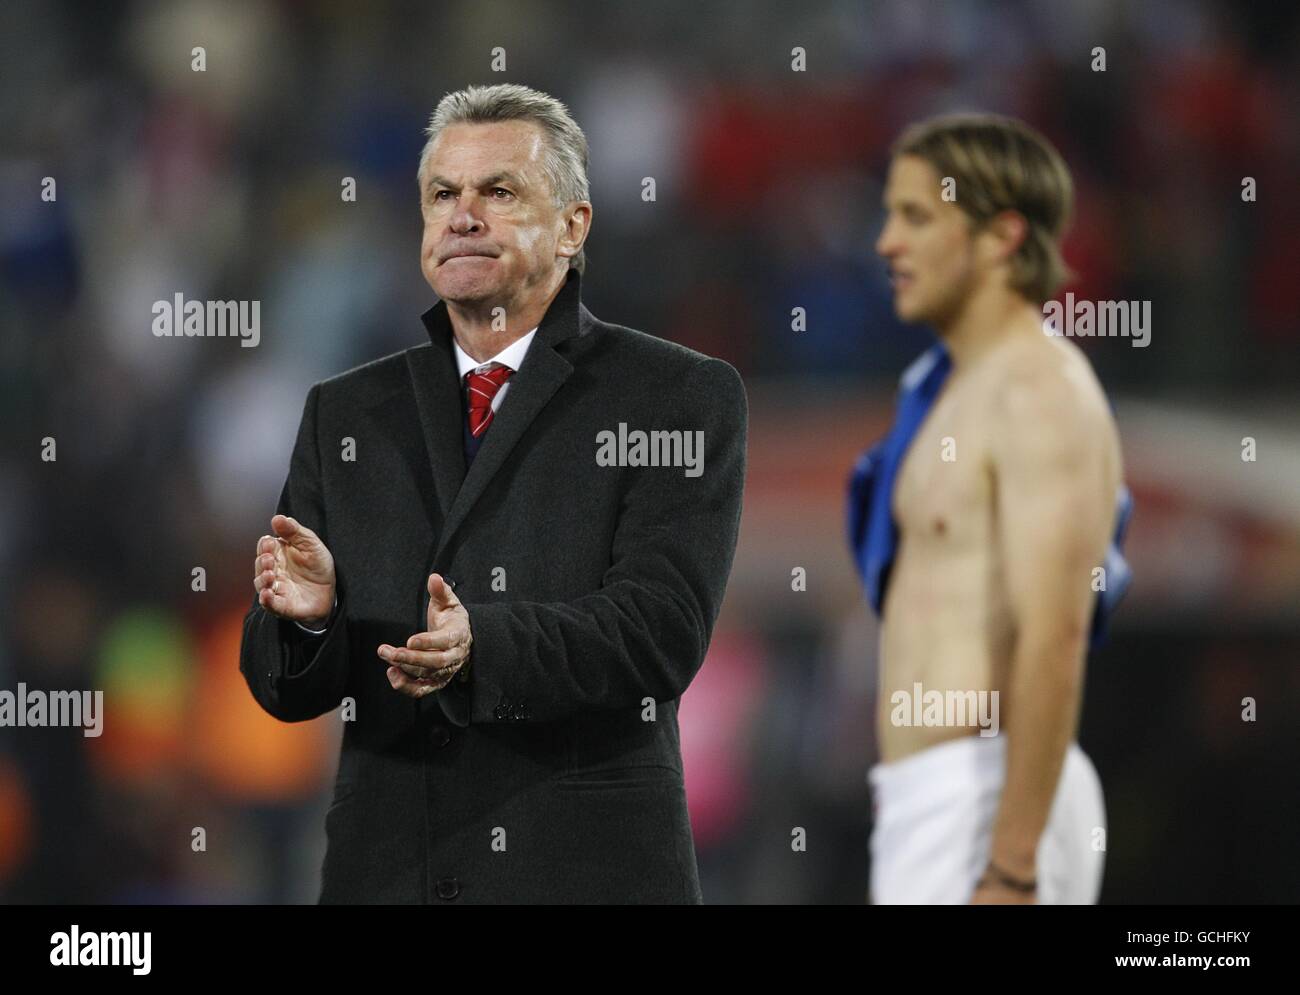 Soccer - 2010 FIFA World Cup South Africa - Group H - Switzerland v Honduras - Free State Stadium. Switzerland's Head Coach Ottmar Hitzfeld (left) thanks their fans for their support after the final whistle. Stock Photo